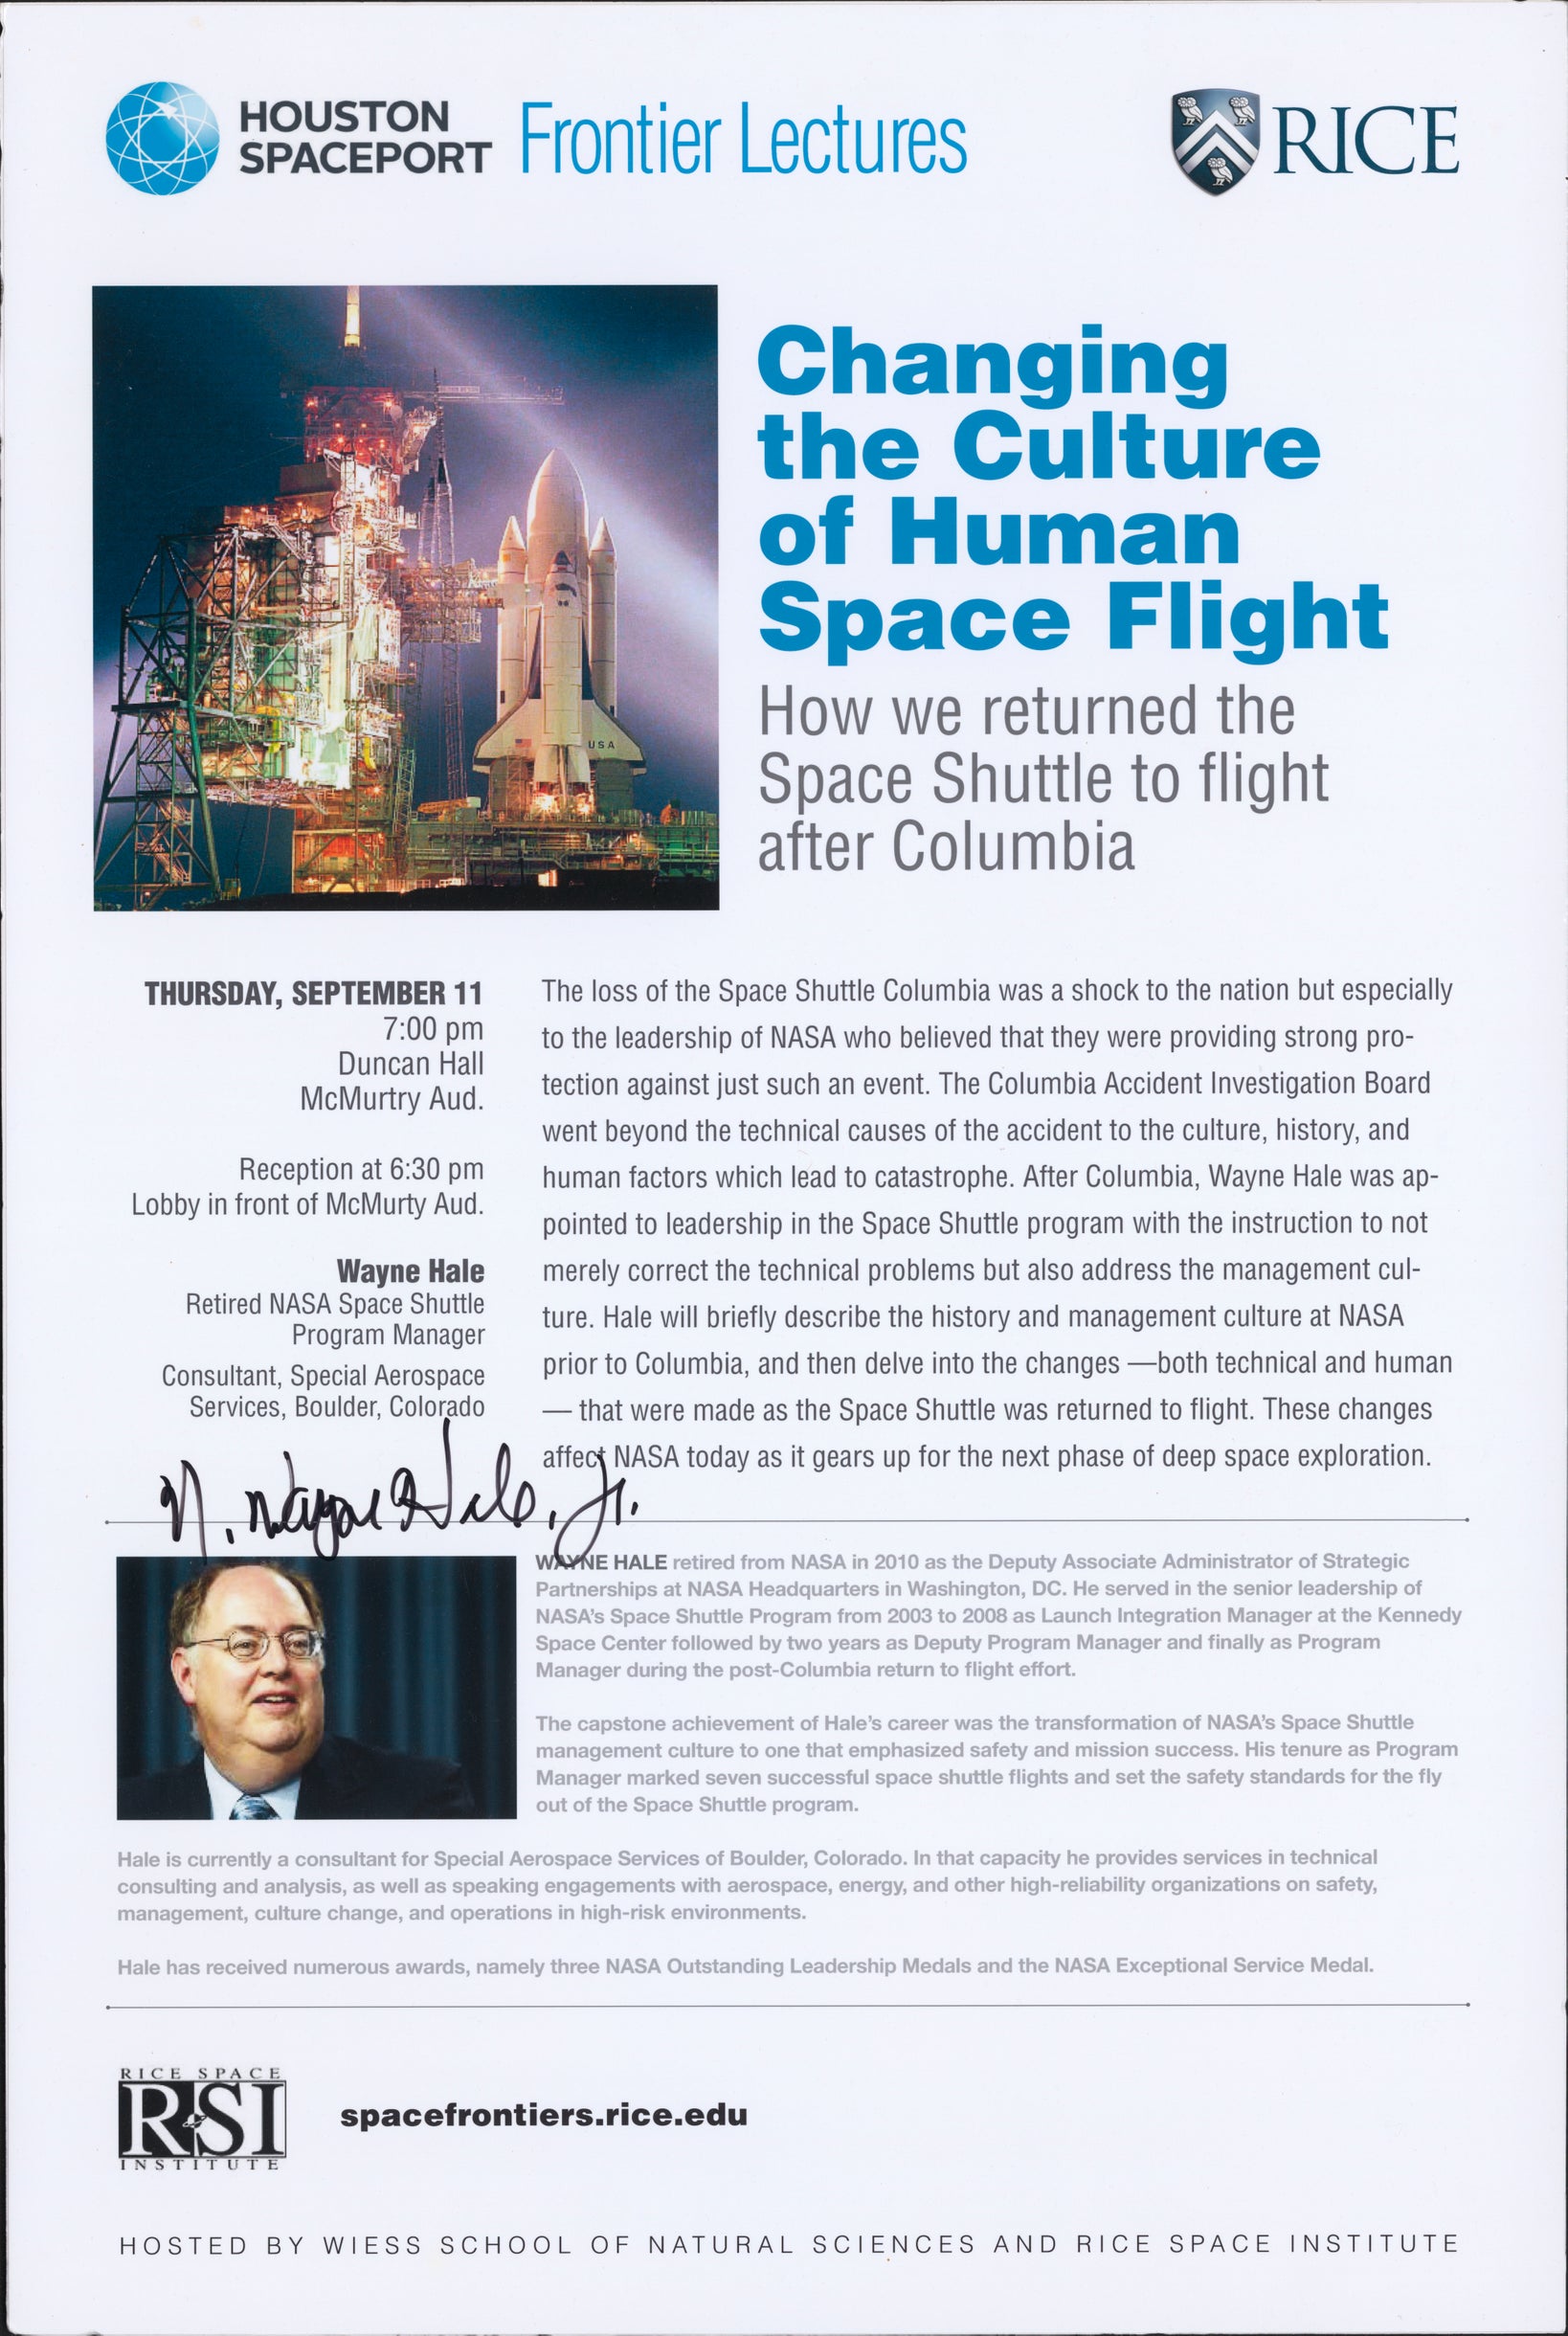 The loss of the Space shuttle Colombia was a shock to the nation but especially to the leadership of NASA who believed that they were providing strong protection against just such an event. The Columbia Accident Investigation Board went beyond the technical causes of the accident to the cultural history and human factors which lead to catastrophe. After Colombia, Wayne Hale was appointed to leadership in the Space Shuttle program with the instructions to not merely correct the technical problems but also address the management culture. Hale has briefly described the history and management culture at NASA prior to Colombia and then delve into the changes - both technical and human - that were made as the space shuttle was returned to flight. These changes affect NASA today as it gears up for the next phase of deep space exploration.